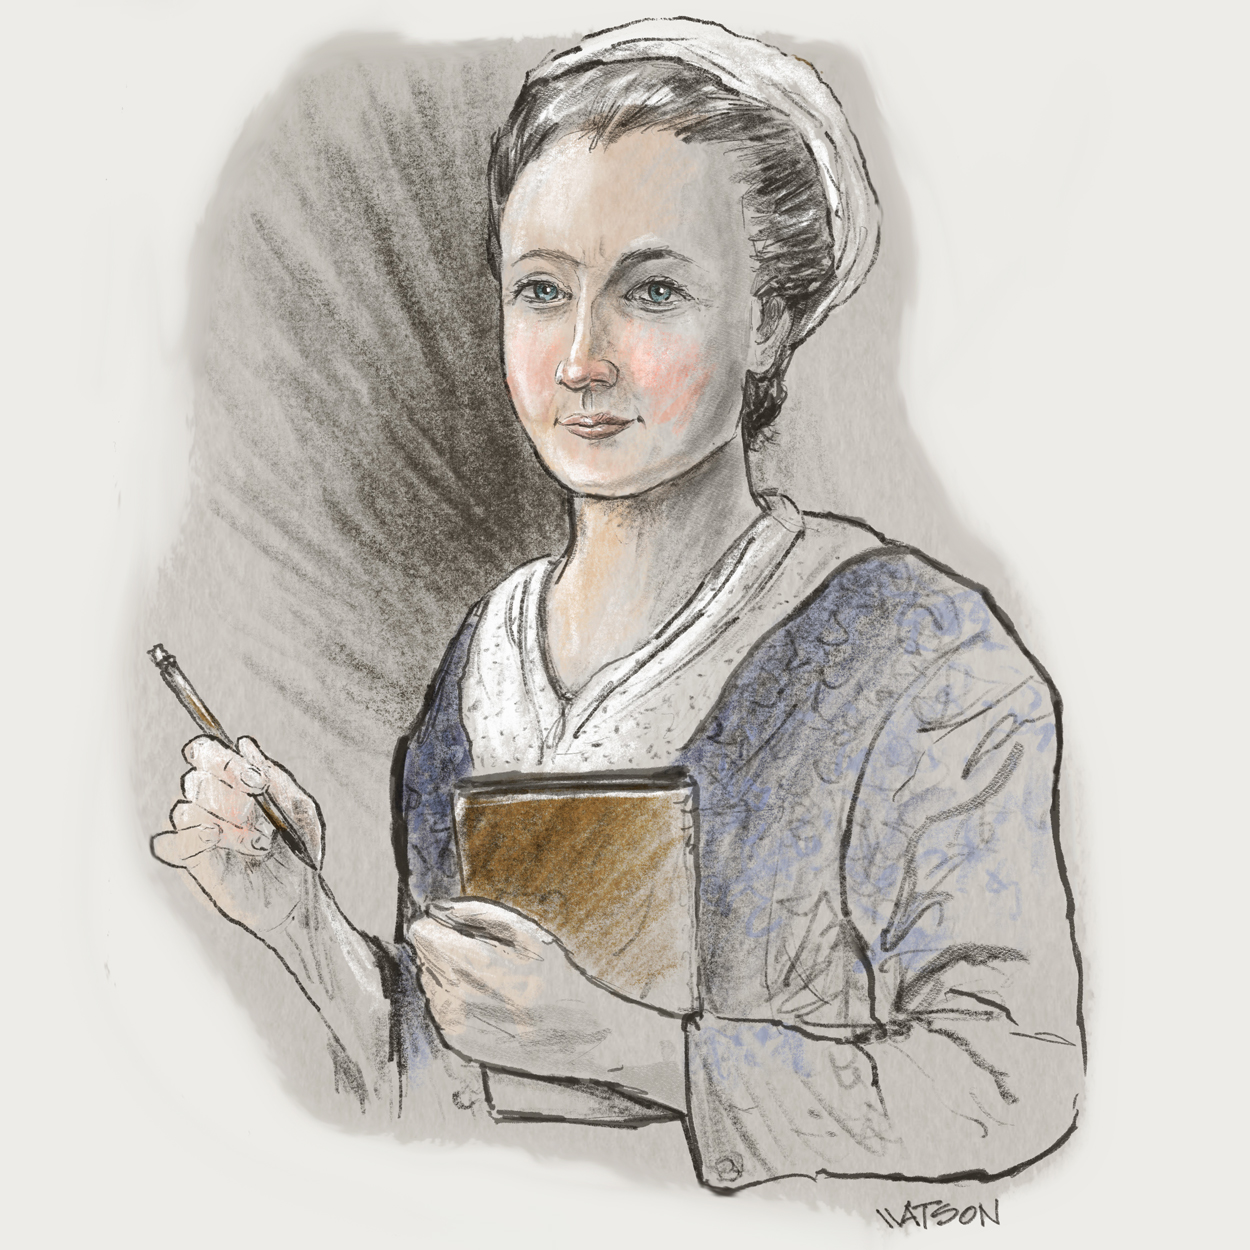 Drawn portrait of Frederica Charlotte Louise Riedesel